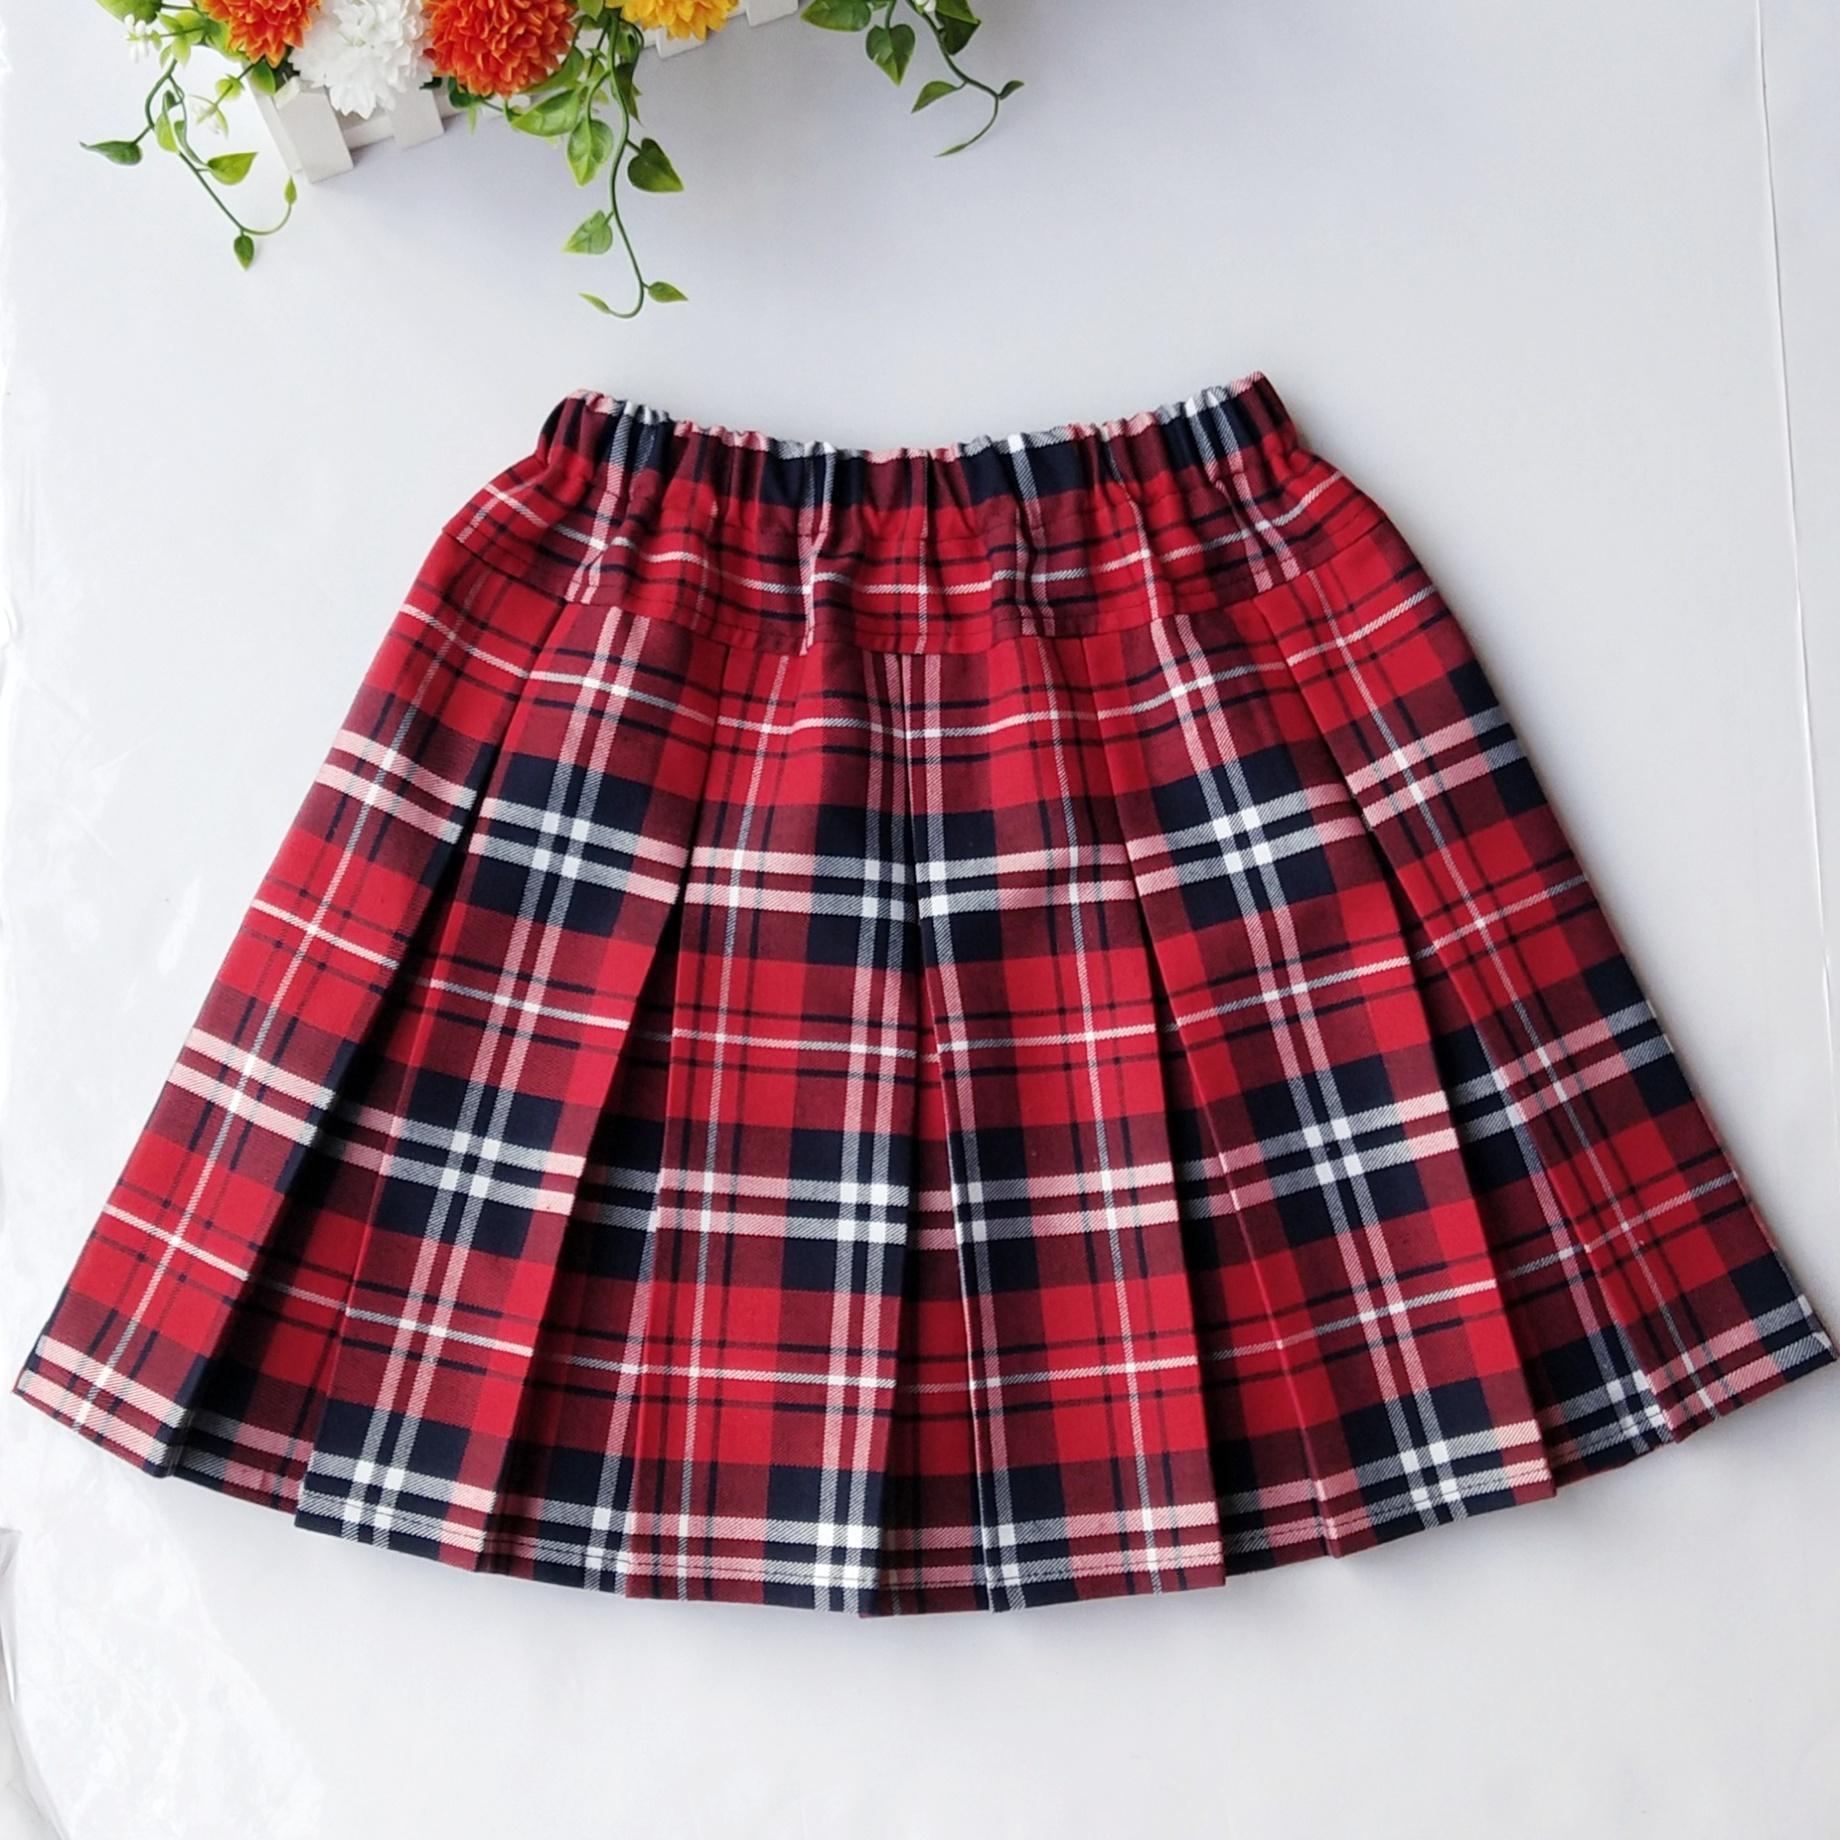 Primary and middle school students school skirt purple red grid skirt skirt girls red white black grid pleated skirt children's costumes